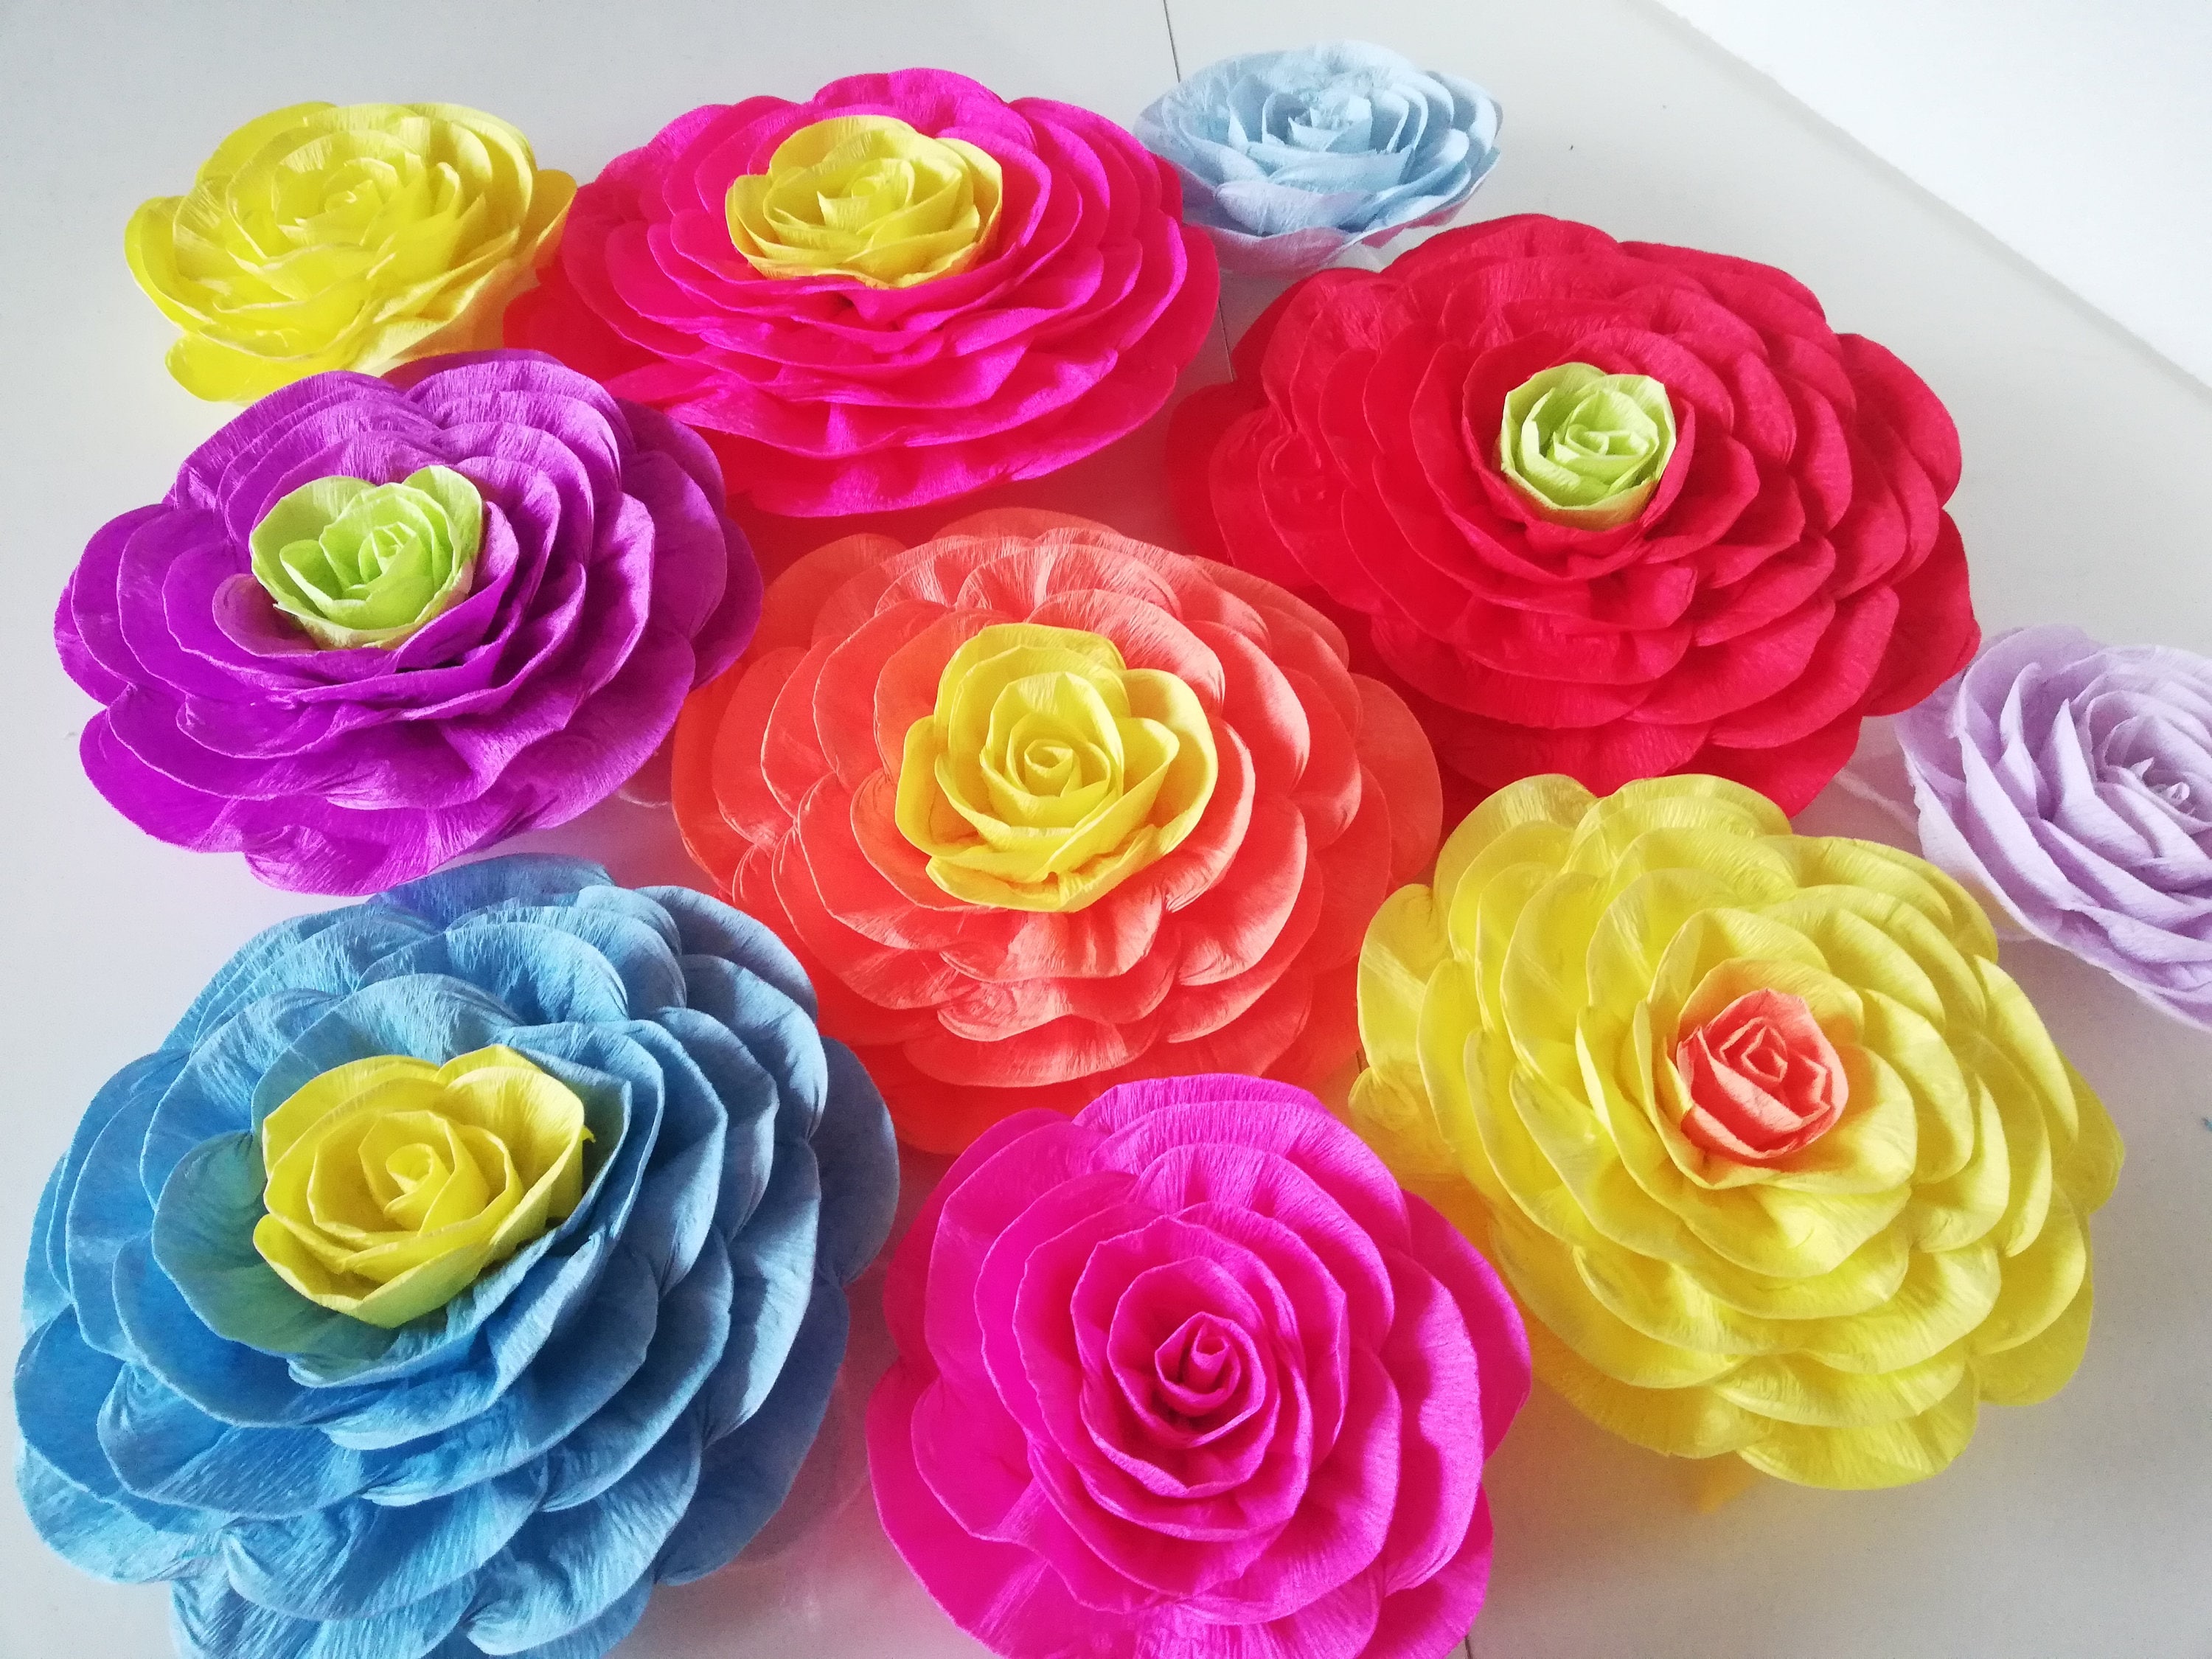  Yunlly 72 Pcs Fiesta Paper Flowers Set Colorful Mexican Tissue  Paper Flowers DIY Crepe Paper Flowers for Birthday Wedding Backdrop Wall  Party Decor (Bright Color,6 Inch, 8 Inch, 10 Inch) 